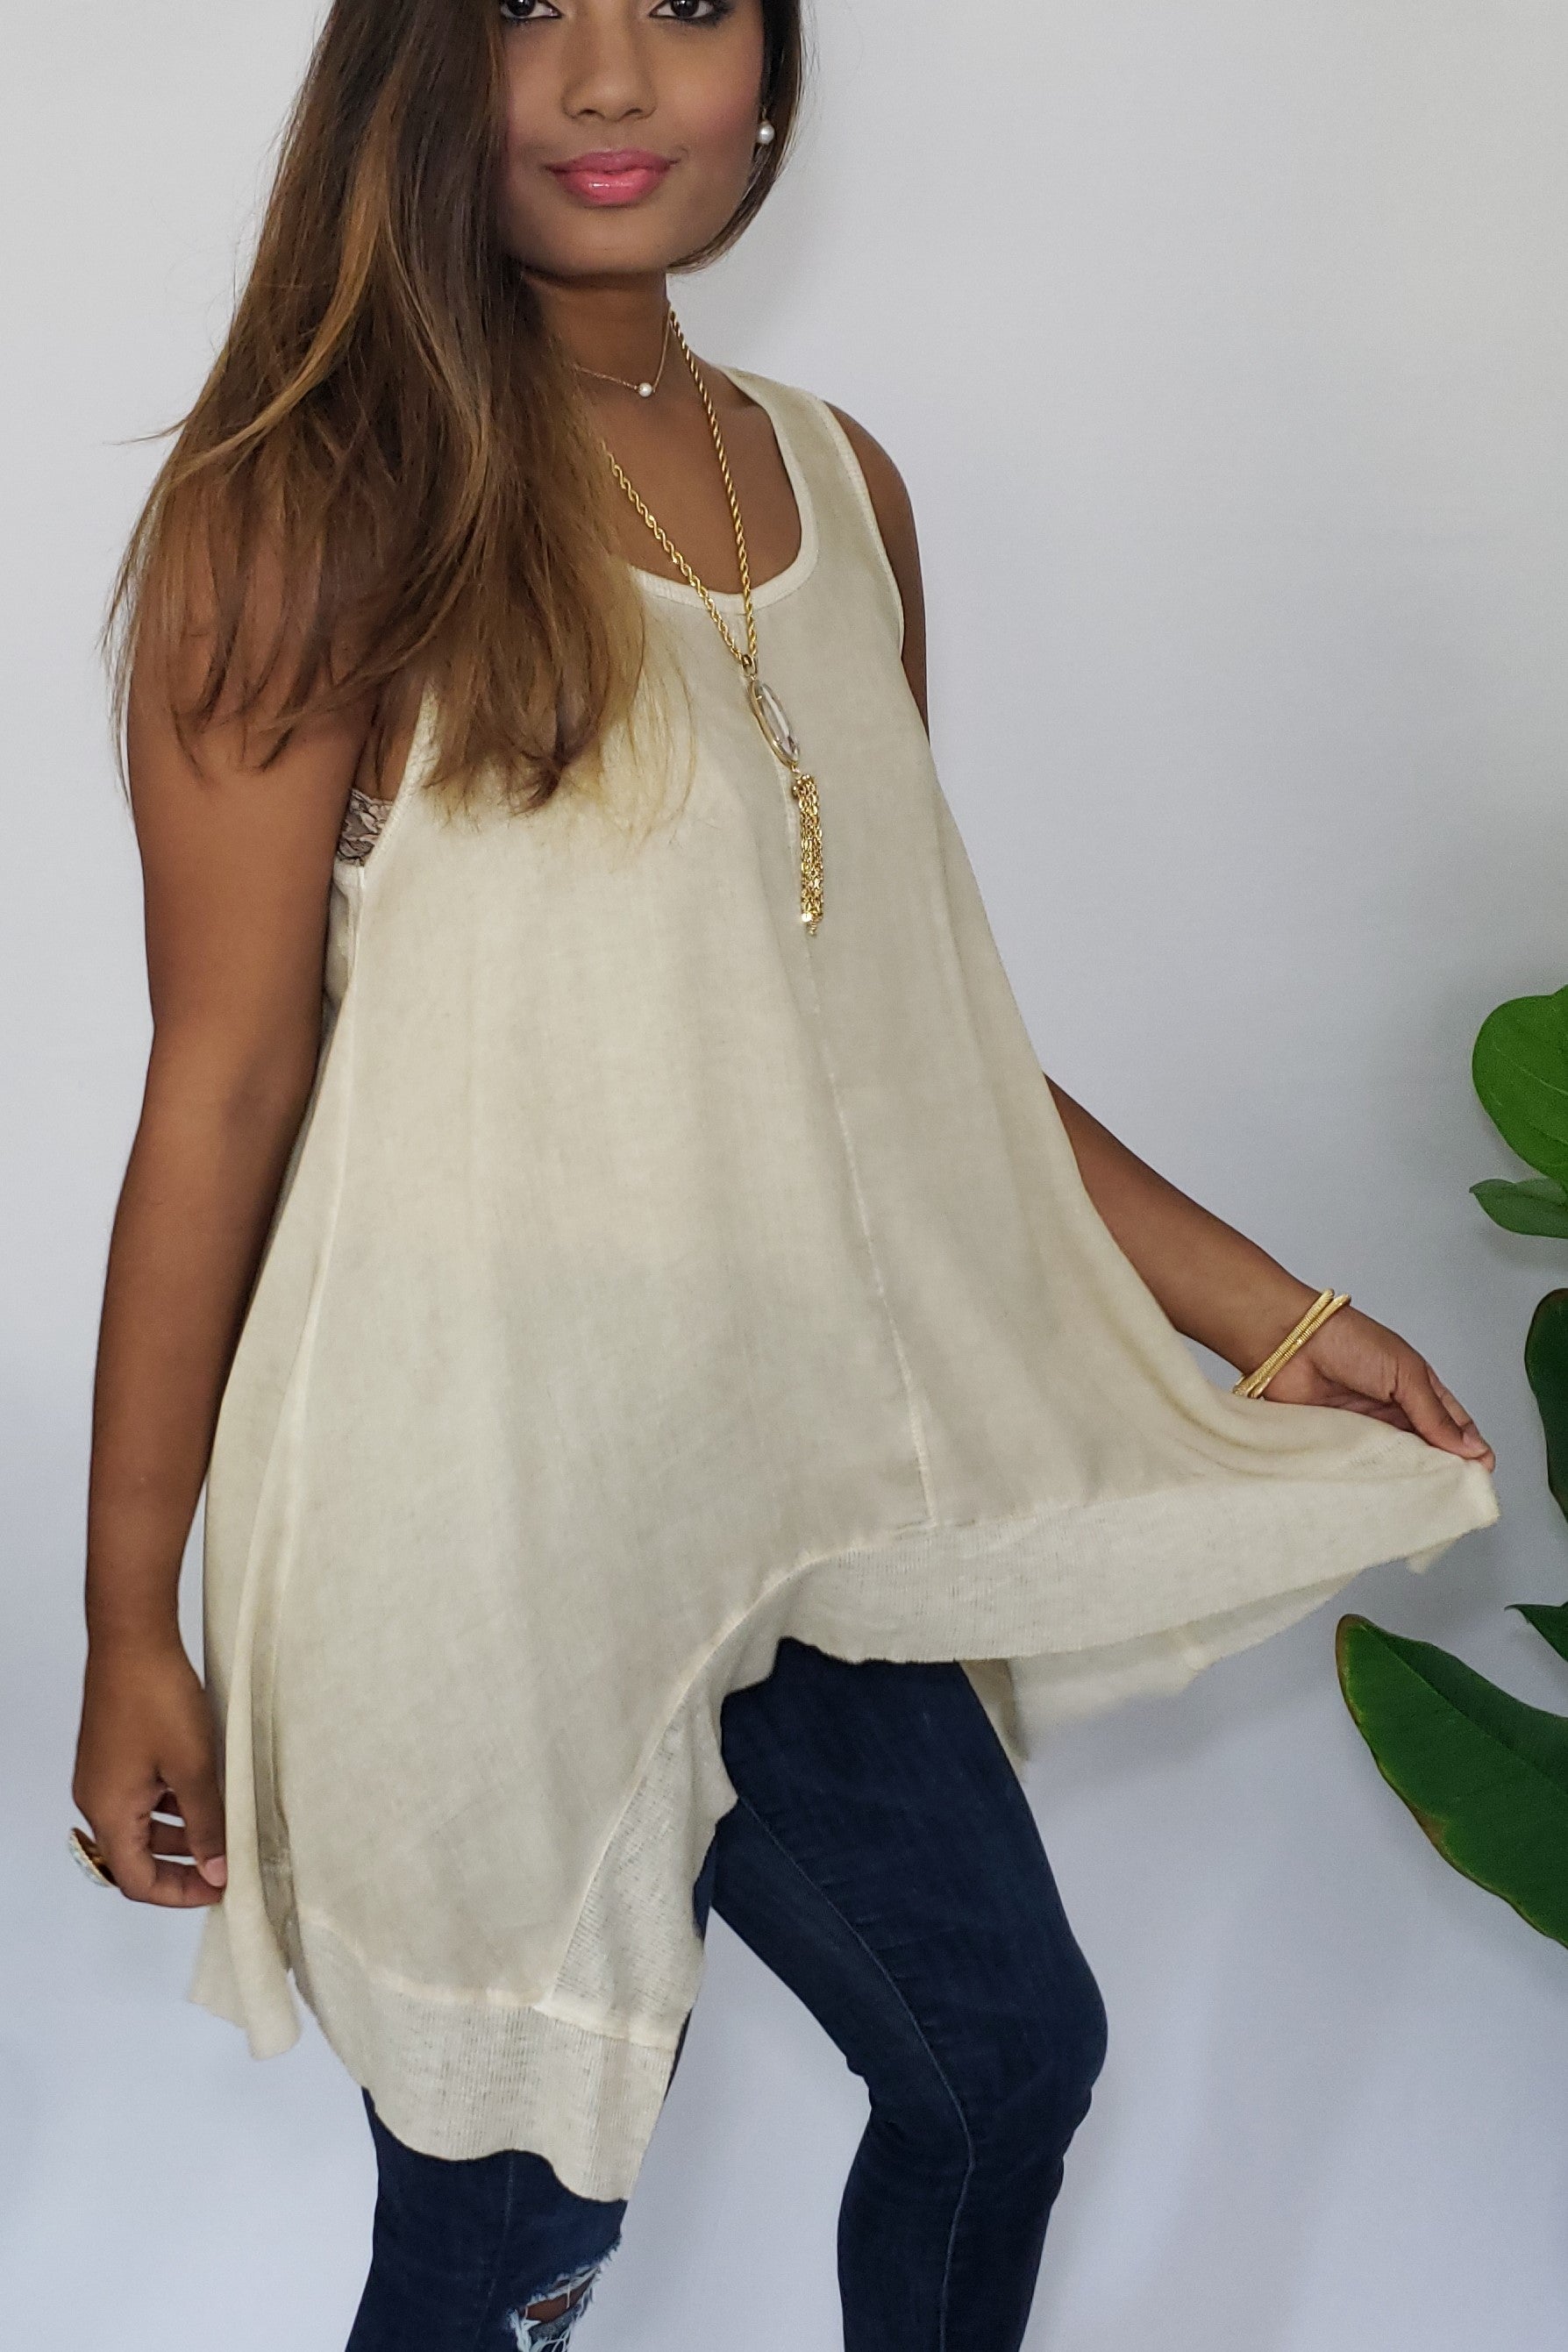 Celia- Was- Here Tank in Neutral Taupe - Houzz of DVA Boutique